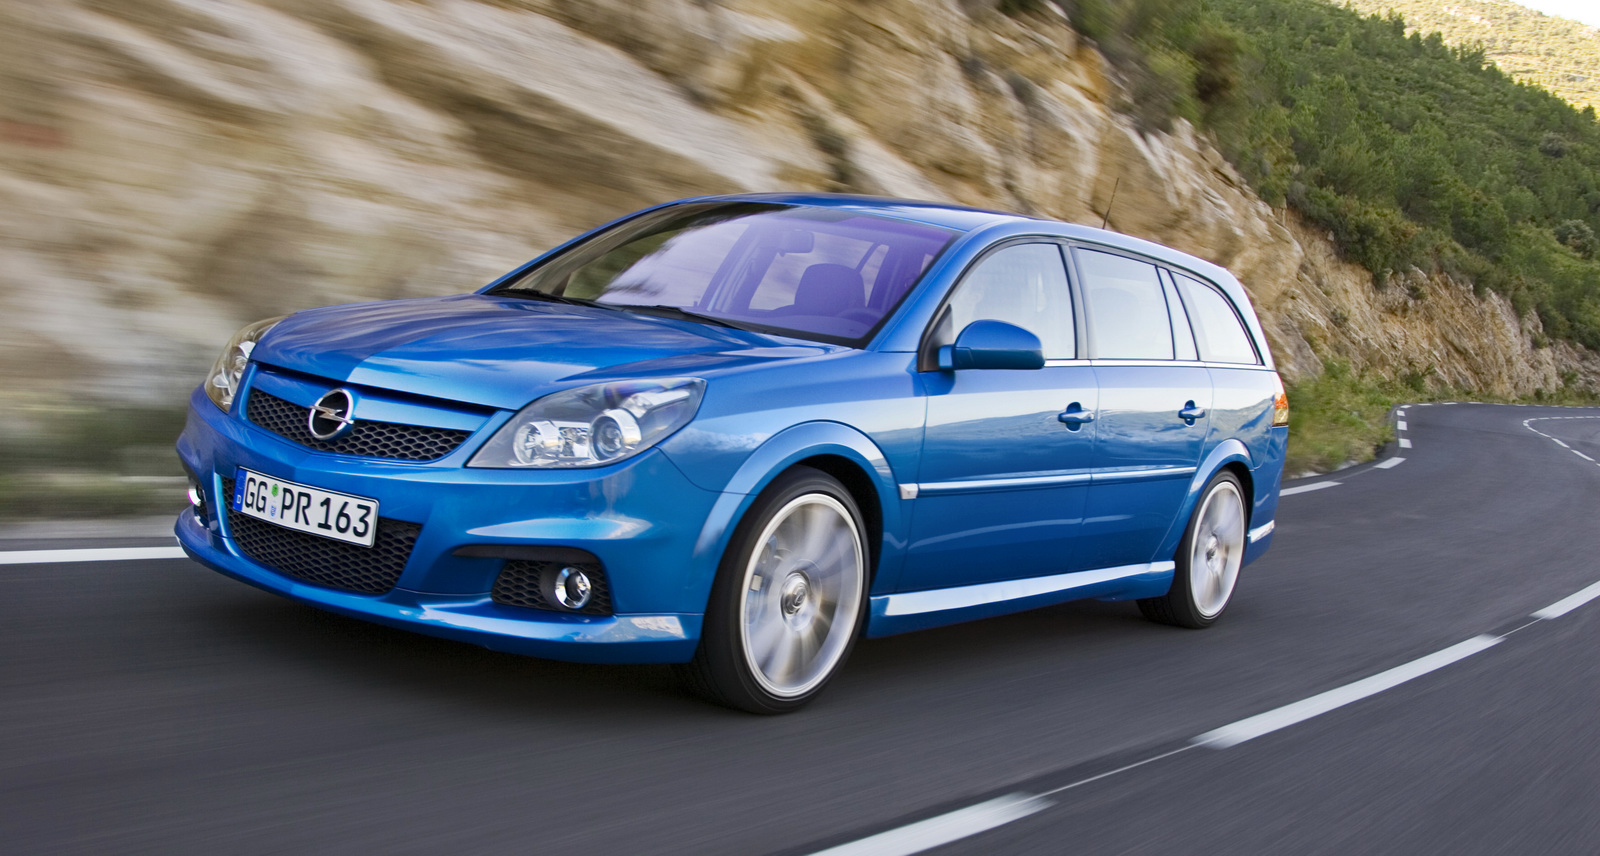 stad Vooruitzien Hobart Opel OPC Turns 15 This Year, Time for a Recap | Carscoops